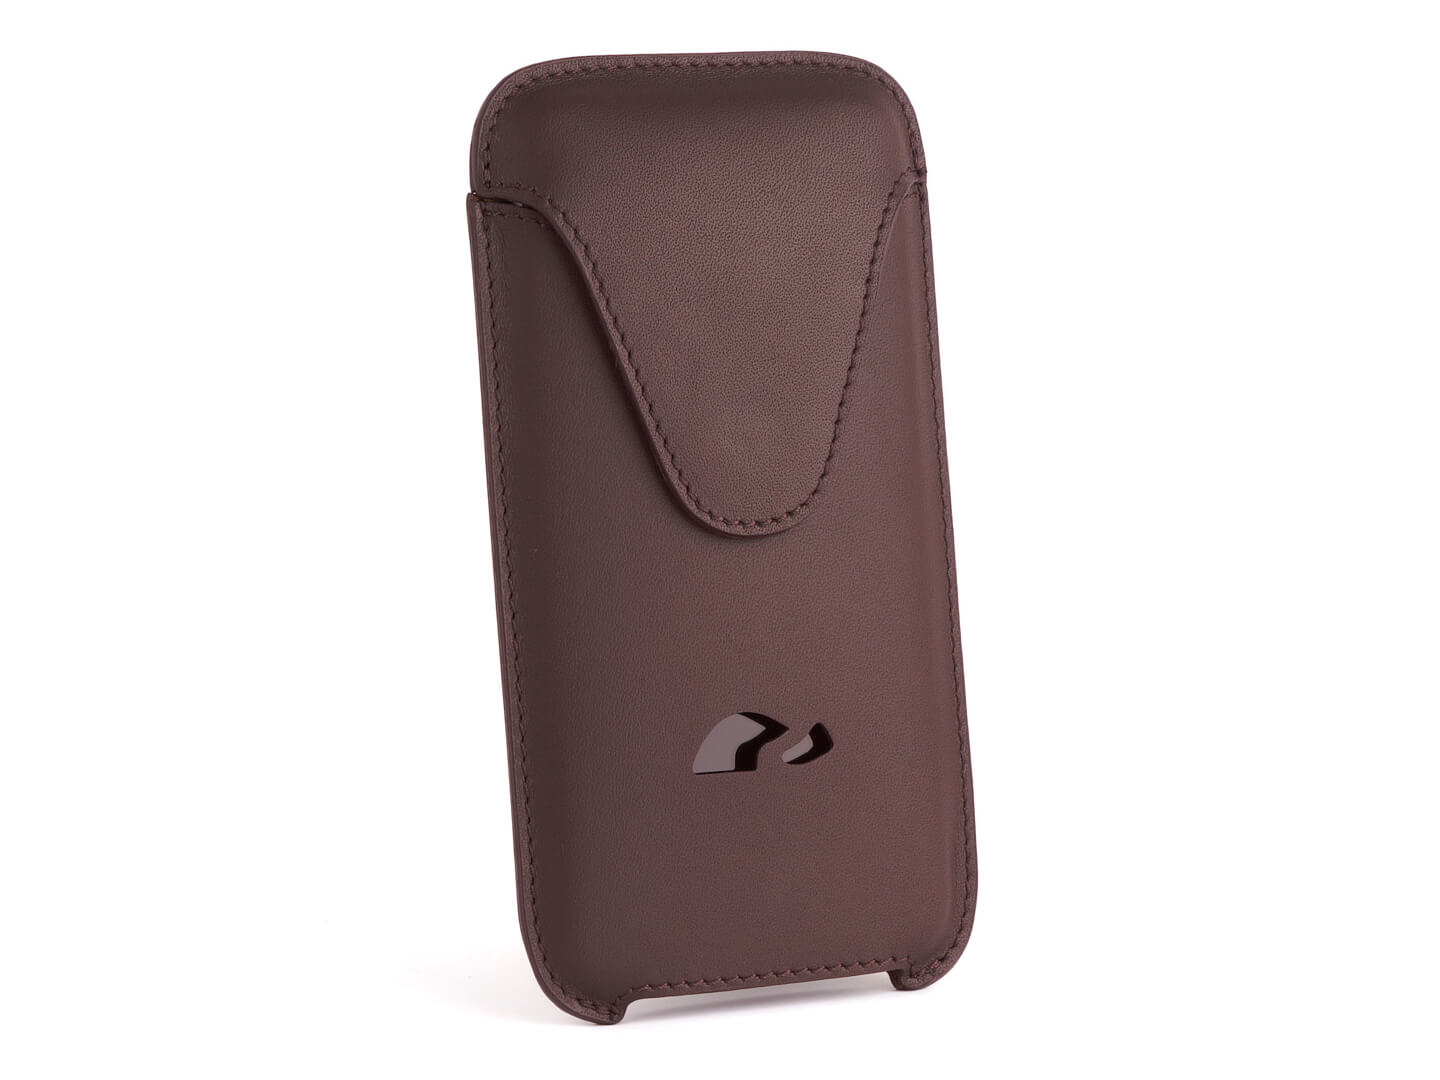 Iphone 6 7 8 Plus Xs Max Leather Pouch Protective Sleeve Case Carapaz